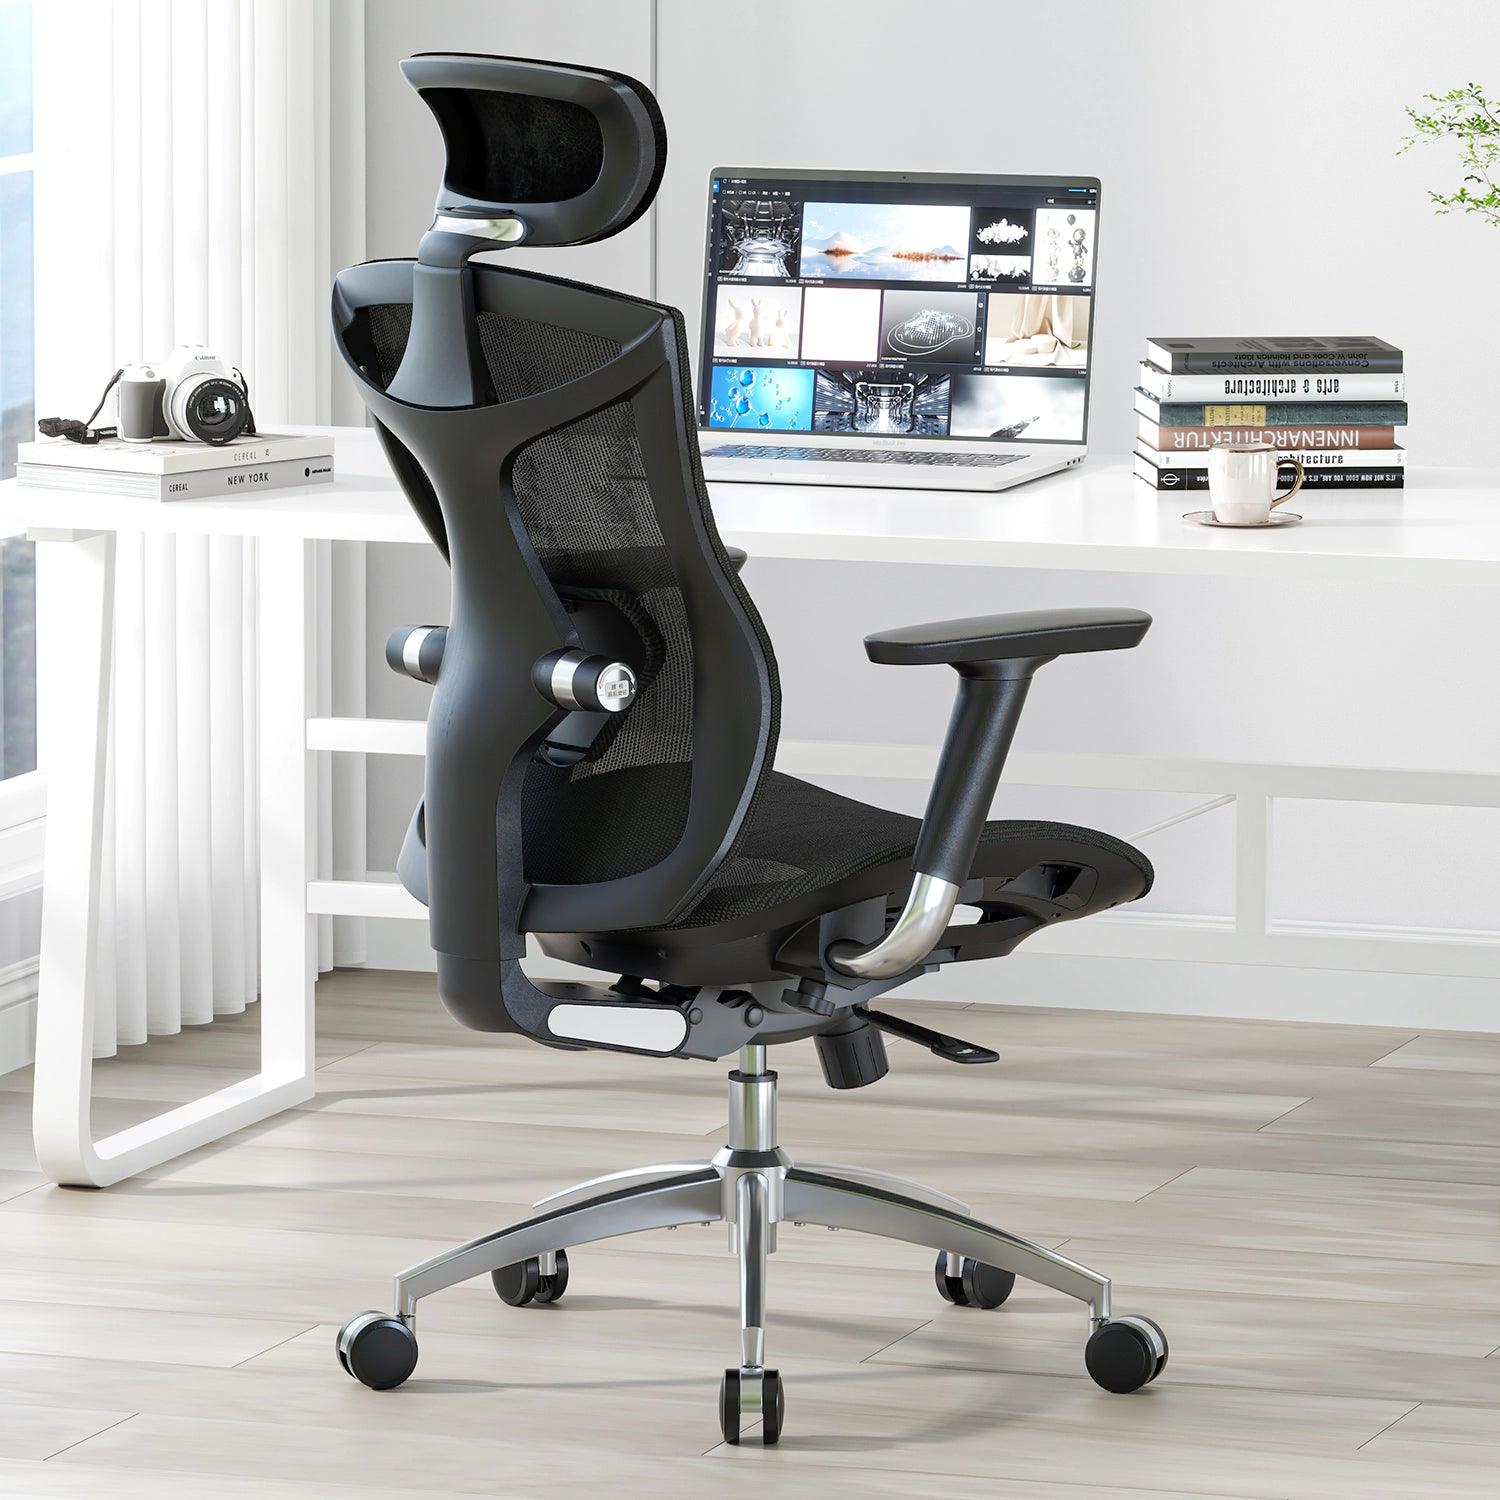 Sihoo V1 Highly Adjustable Executive Chair Combined with Ergonomics and Innovation - Official US Sihoo Store